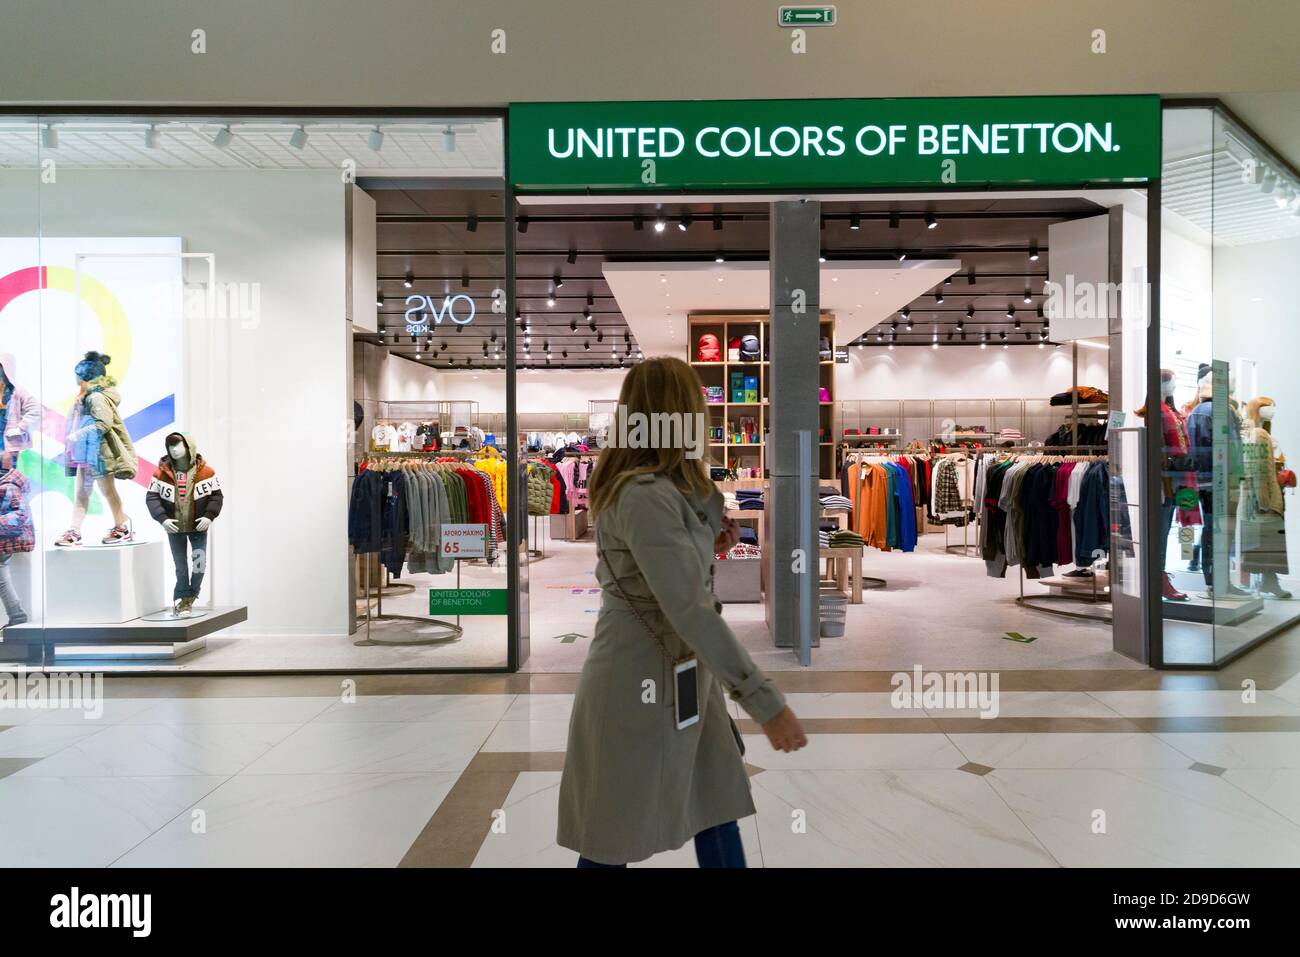 Valencia, Spain. 4th Nov, 2020. A woman walking in front of the United  Colors of Benetton store during the state of alarm at the Osito La Eliana  shopping center. Credit: Xisco Navarro/SOPA